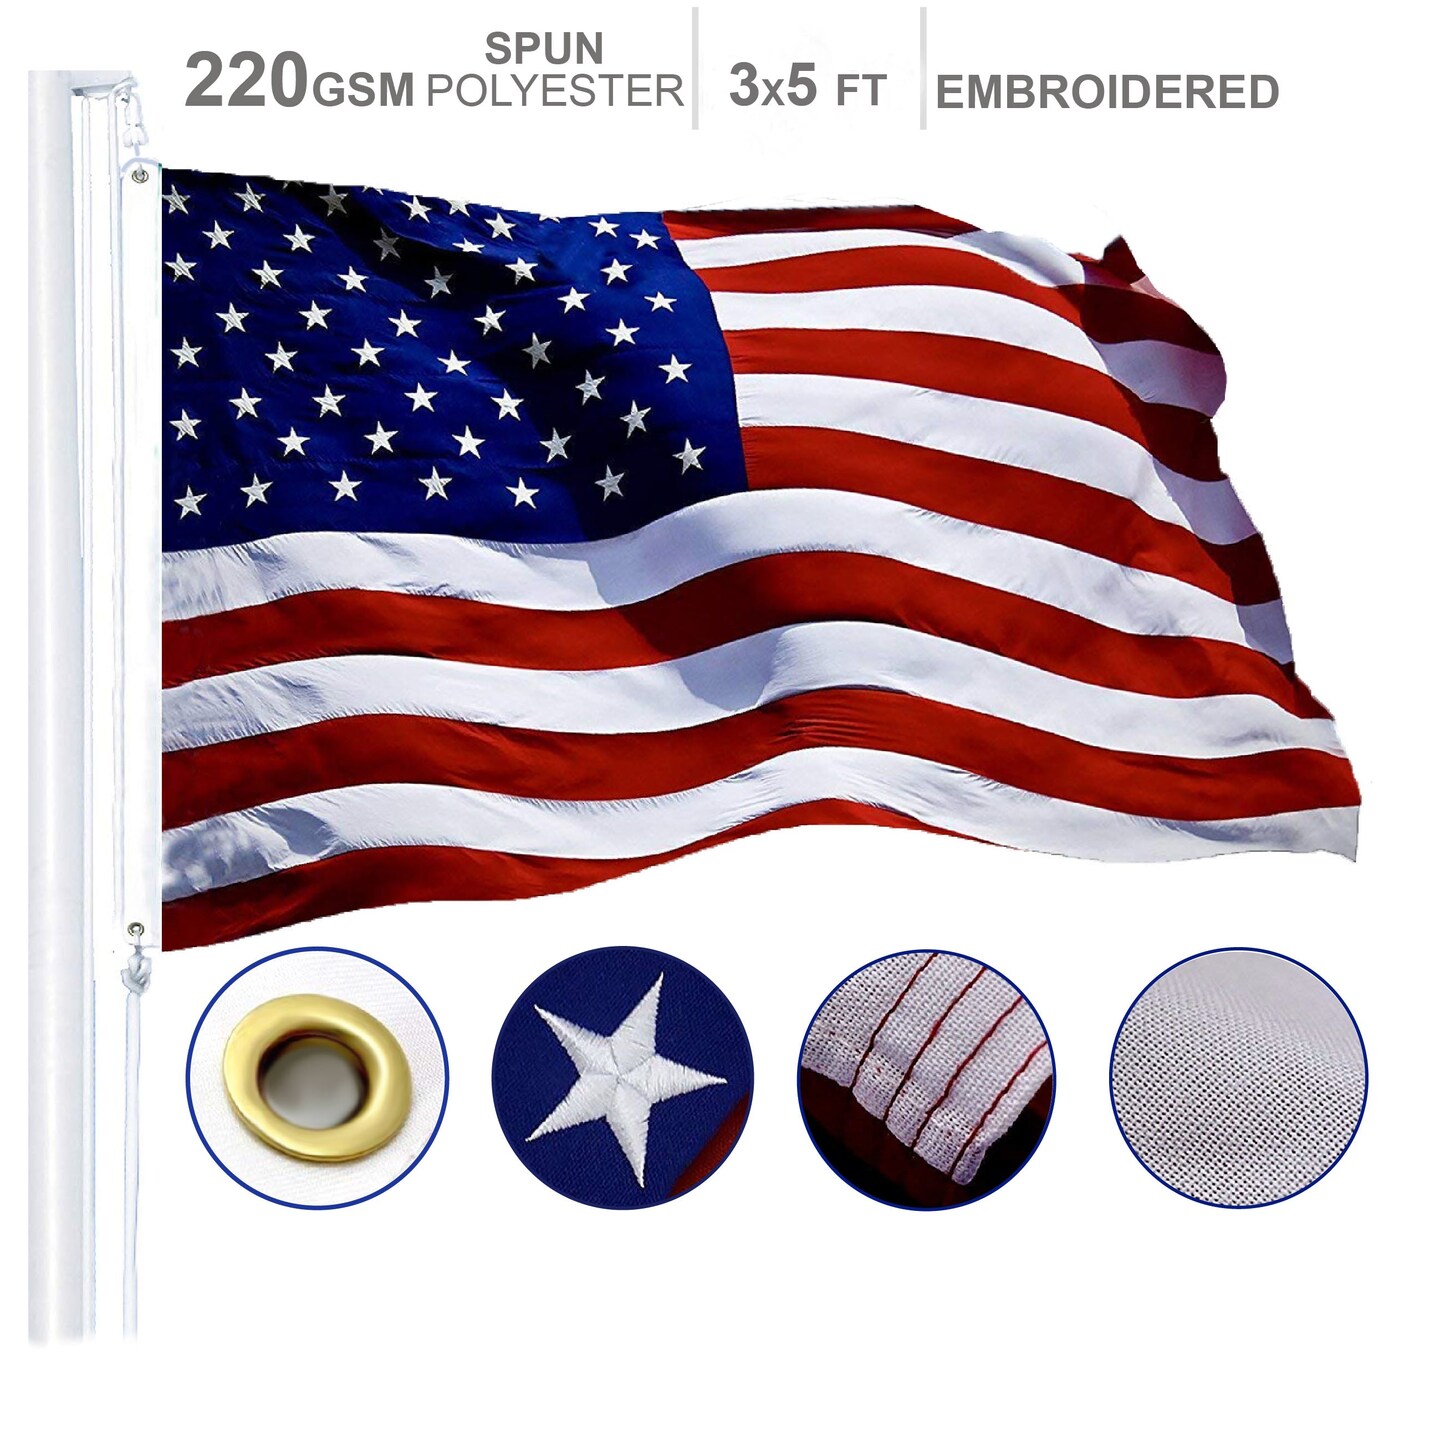 G128 American Flag 220GSM Embroidered Spun Polyester 3x5 Ft